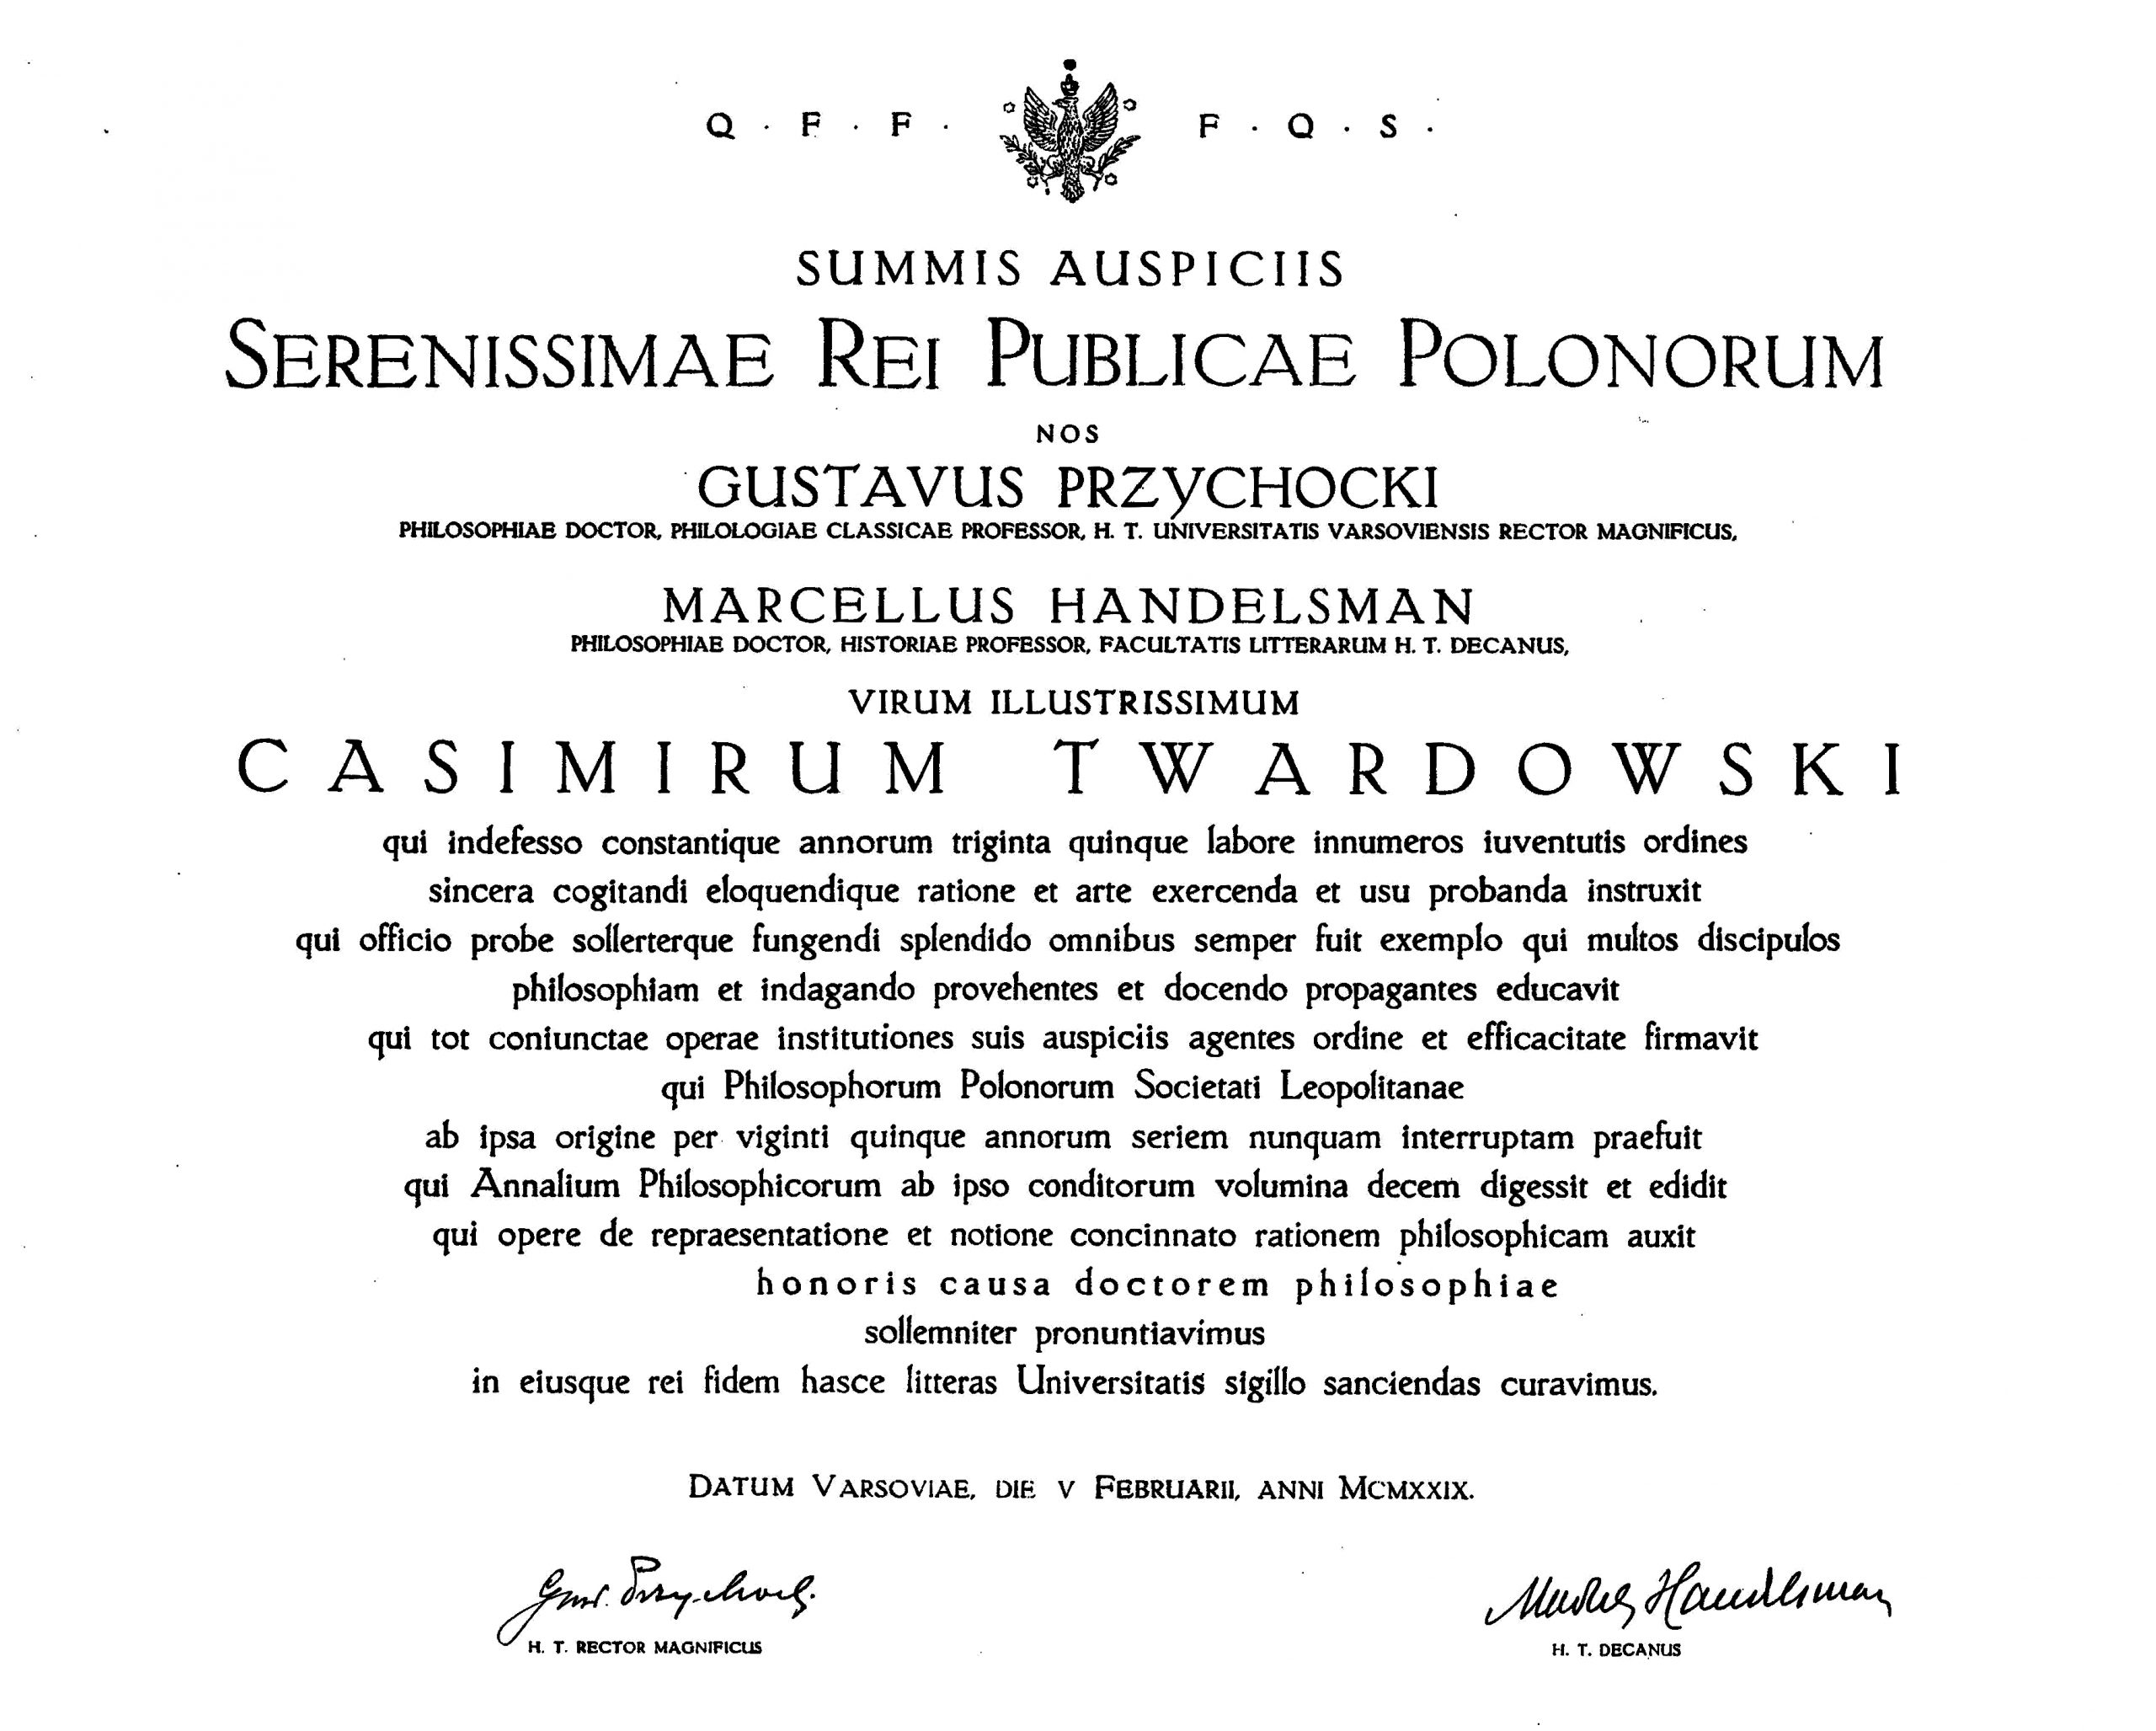 Diploma of the honorary doctorate of the University of Warsaw (1929)